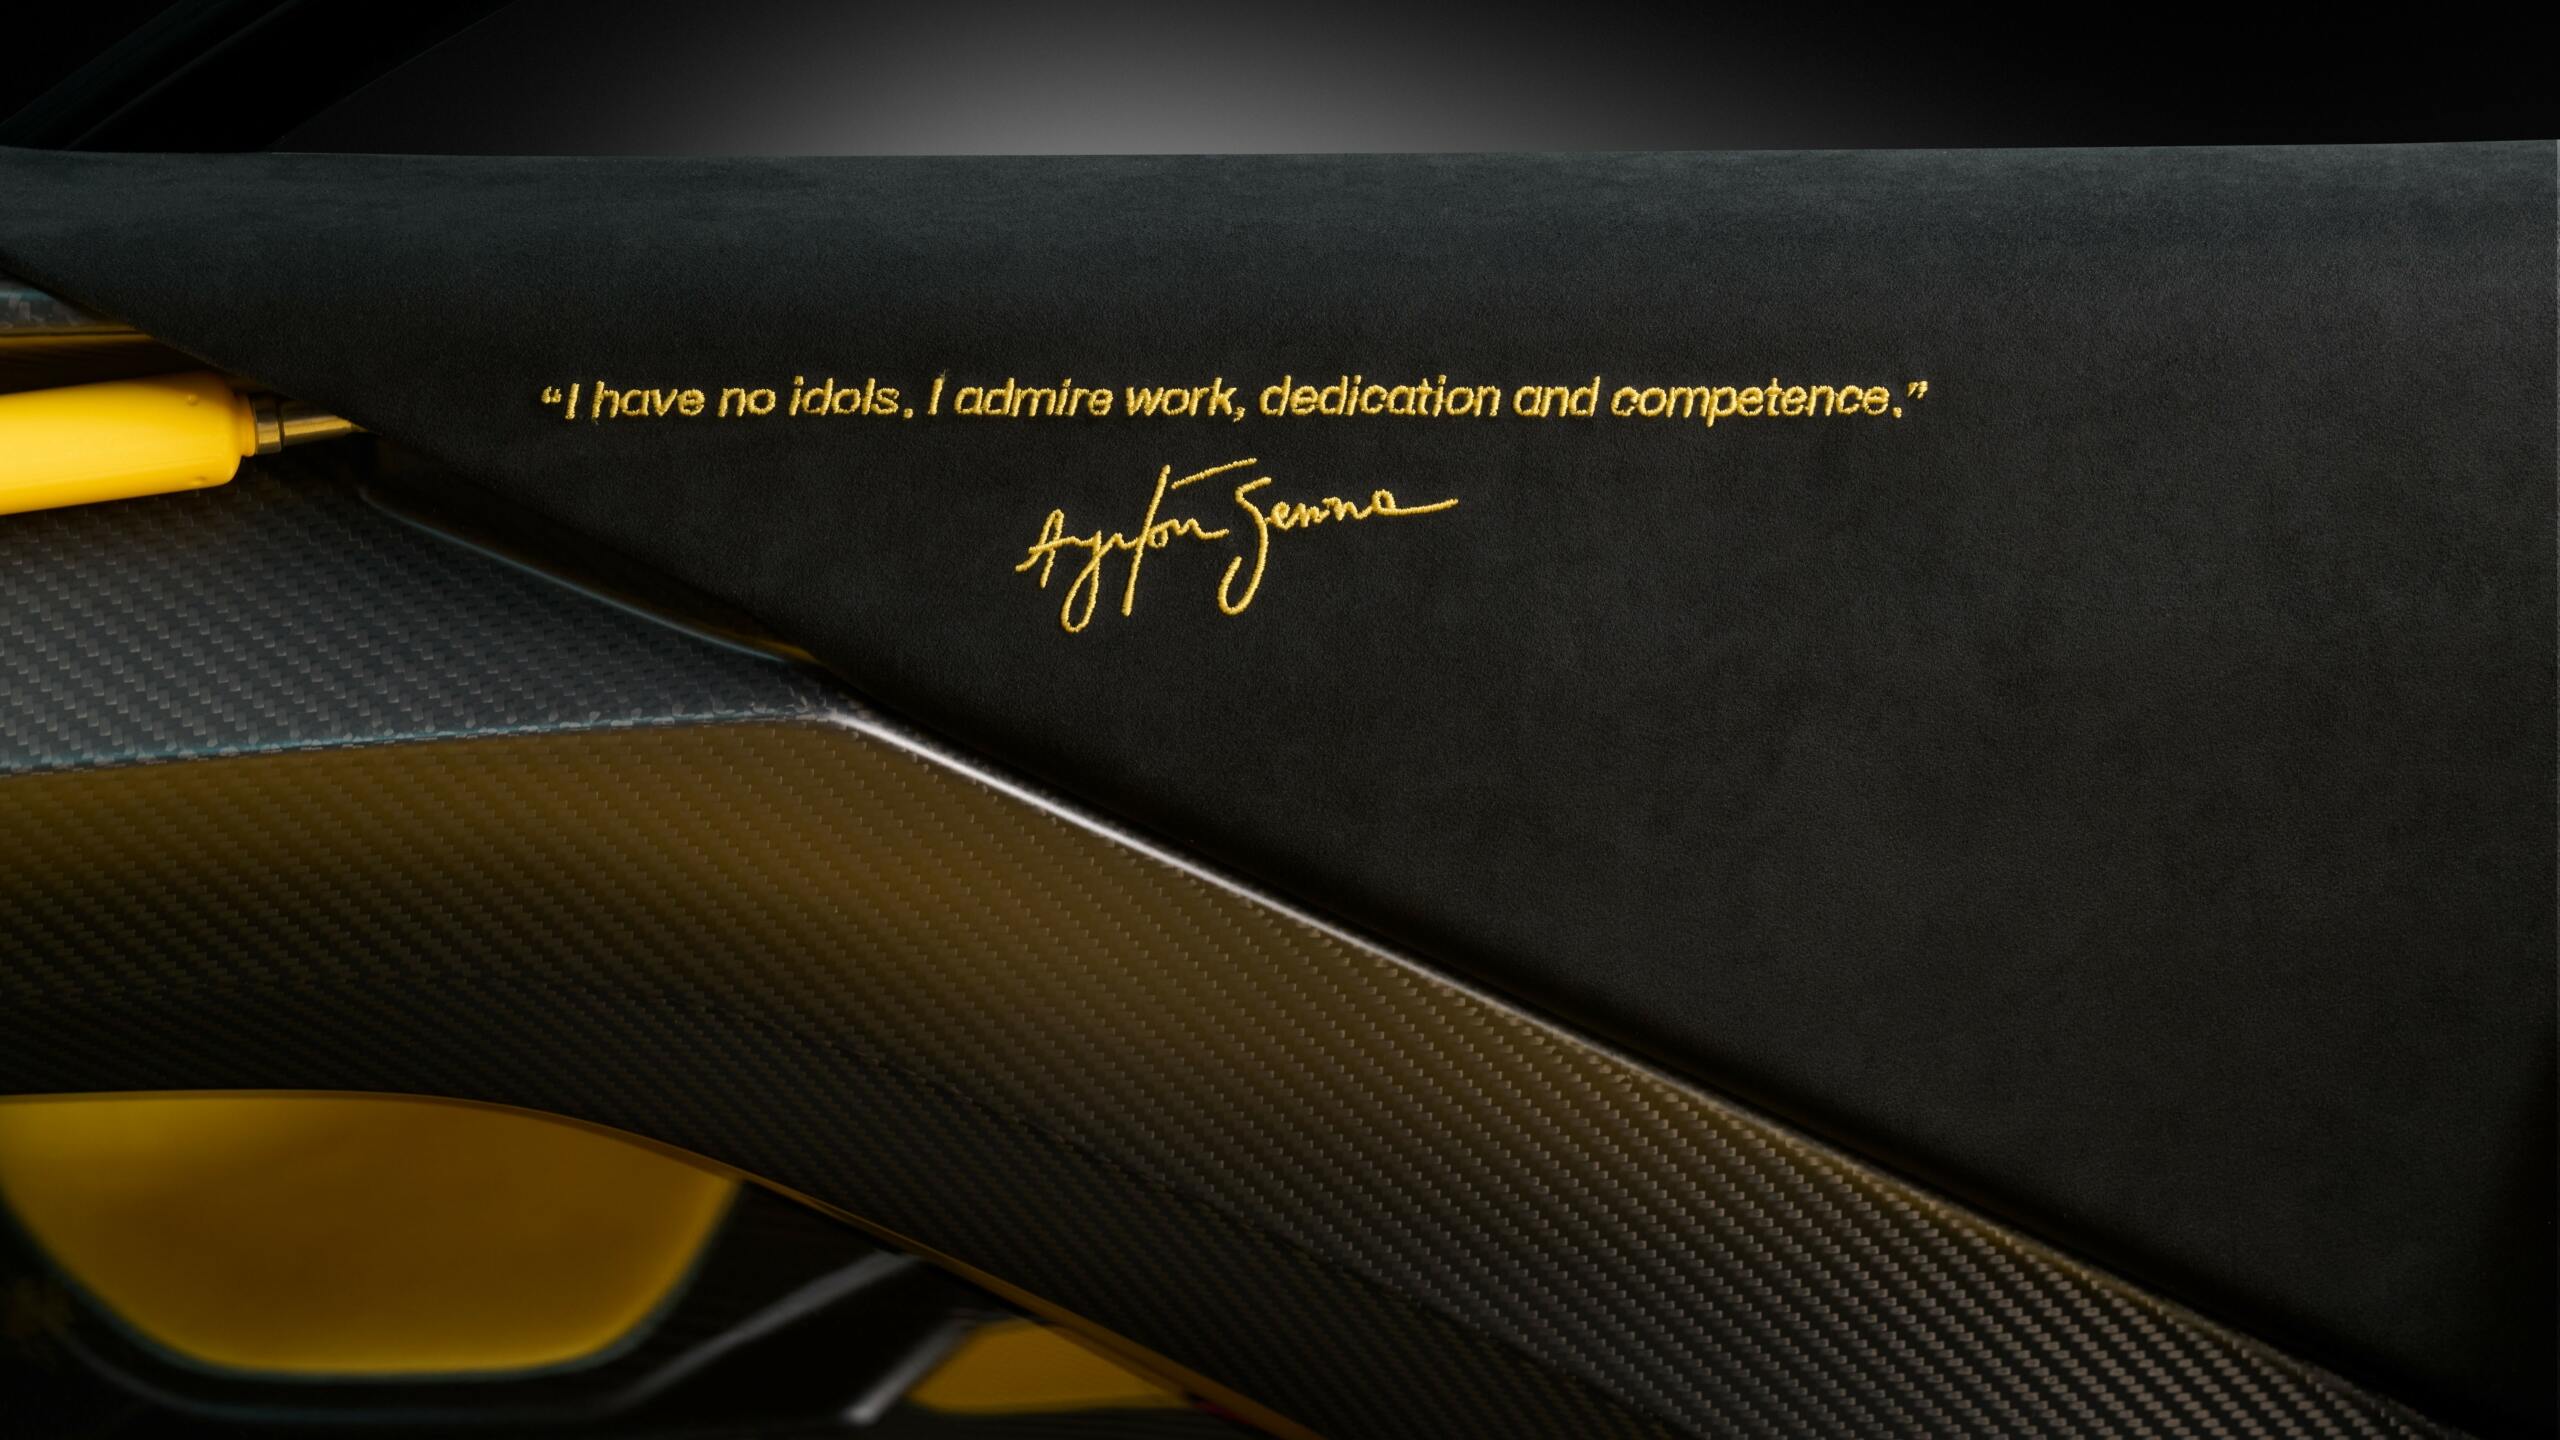 The Sills Of Upholstered Doors Decorated With Ayrton Senna’s Signature Alongside His Quotation Explaining Fis Ethic And Philosophy